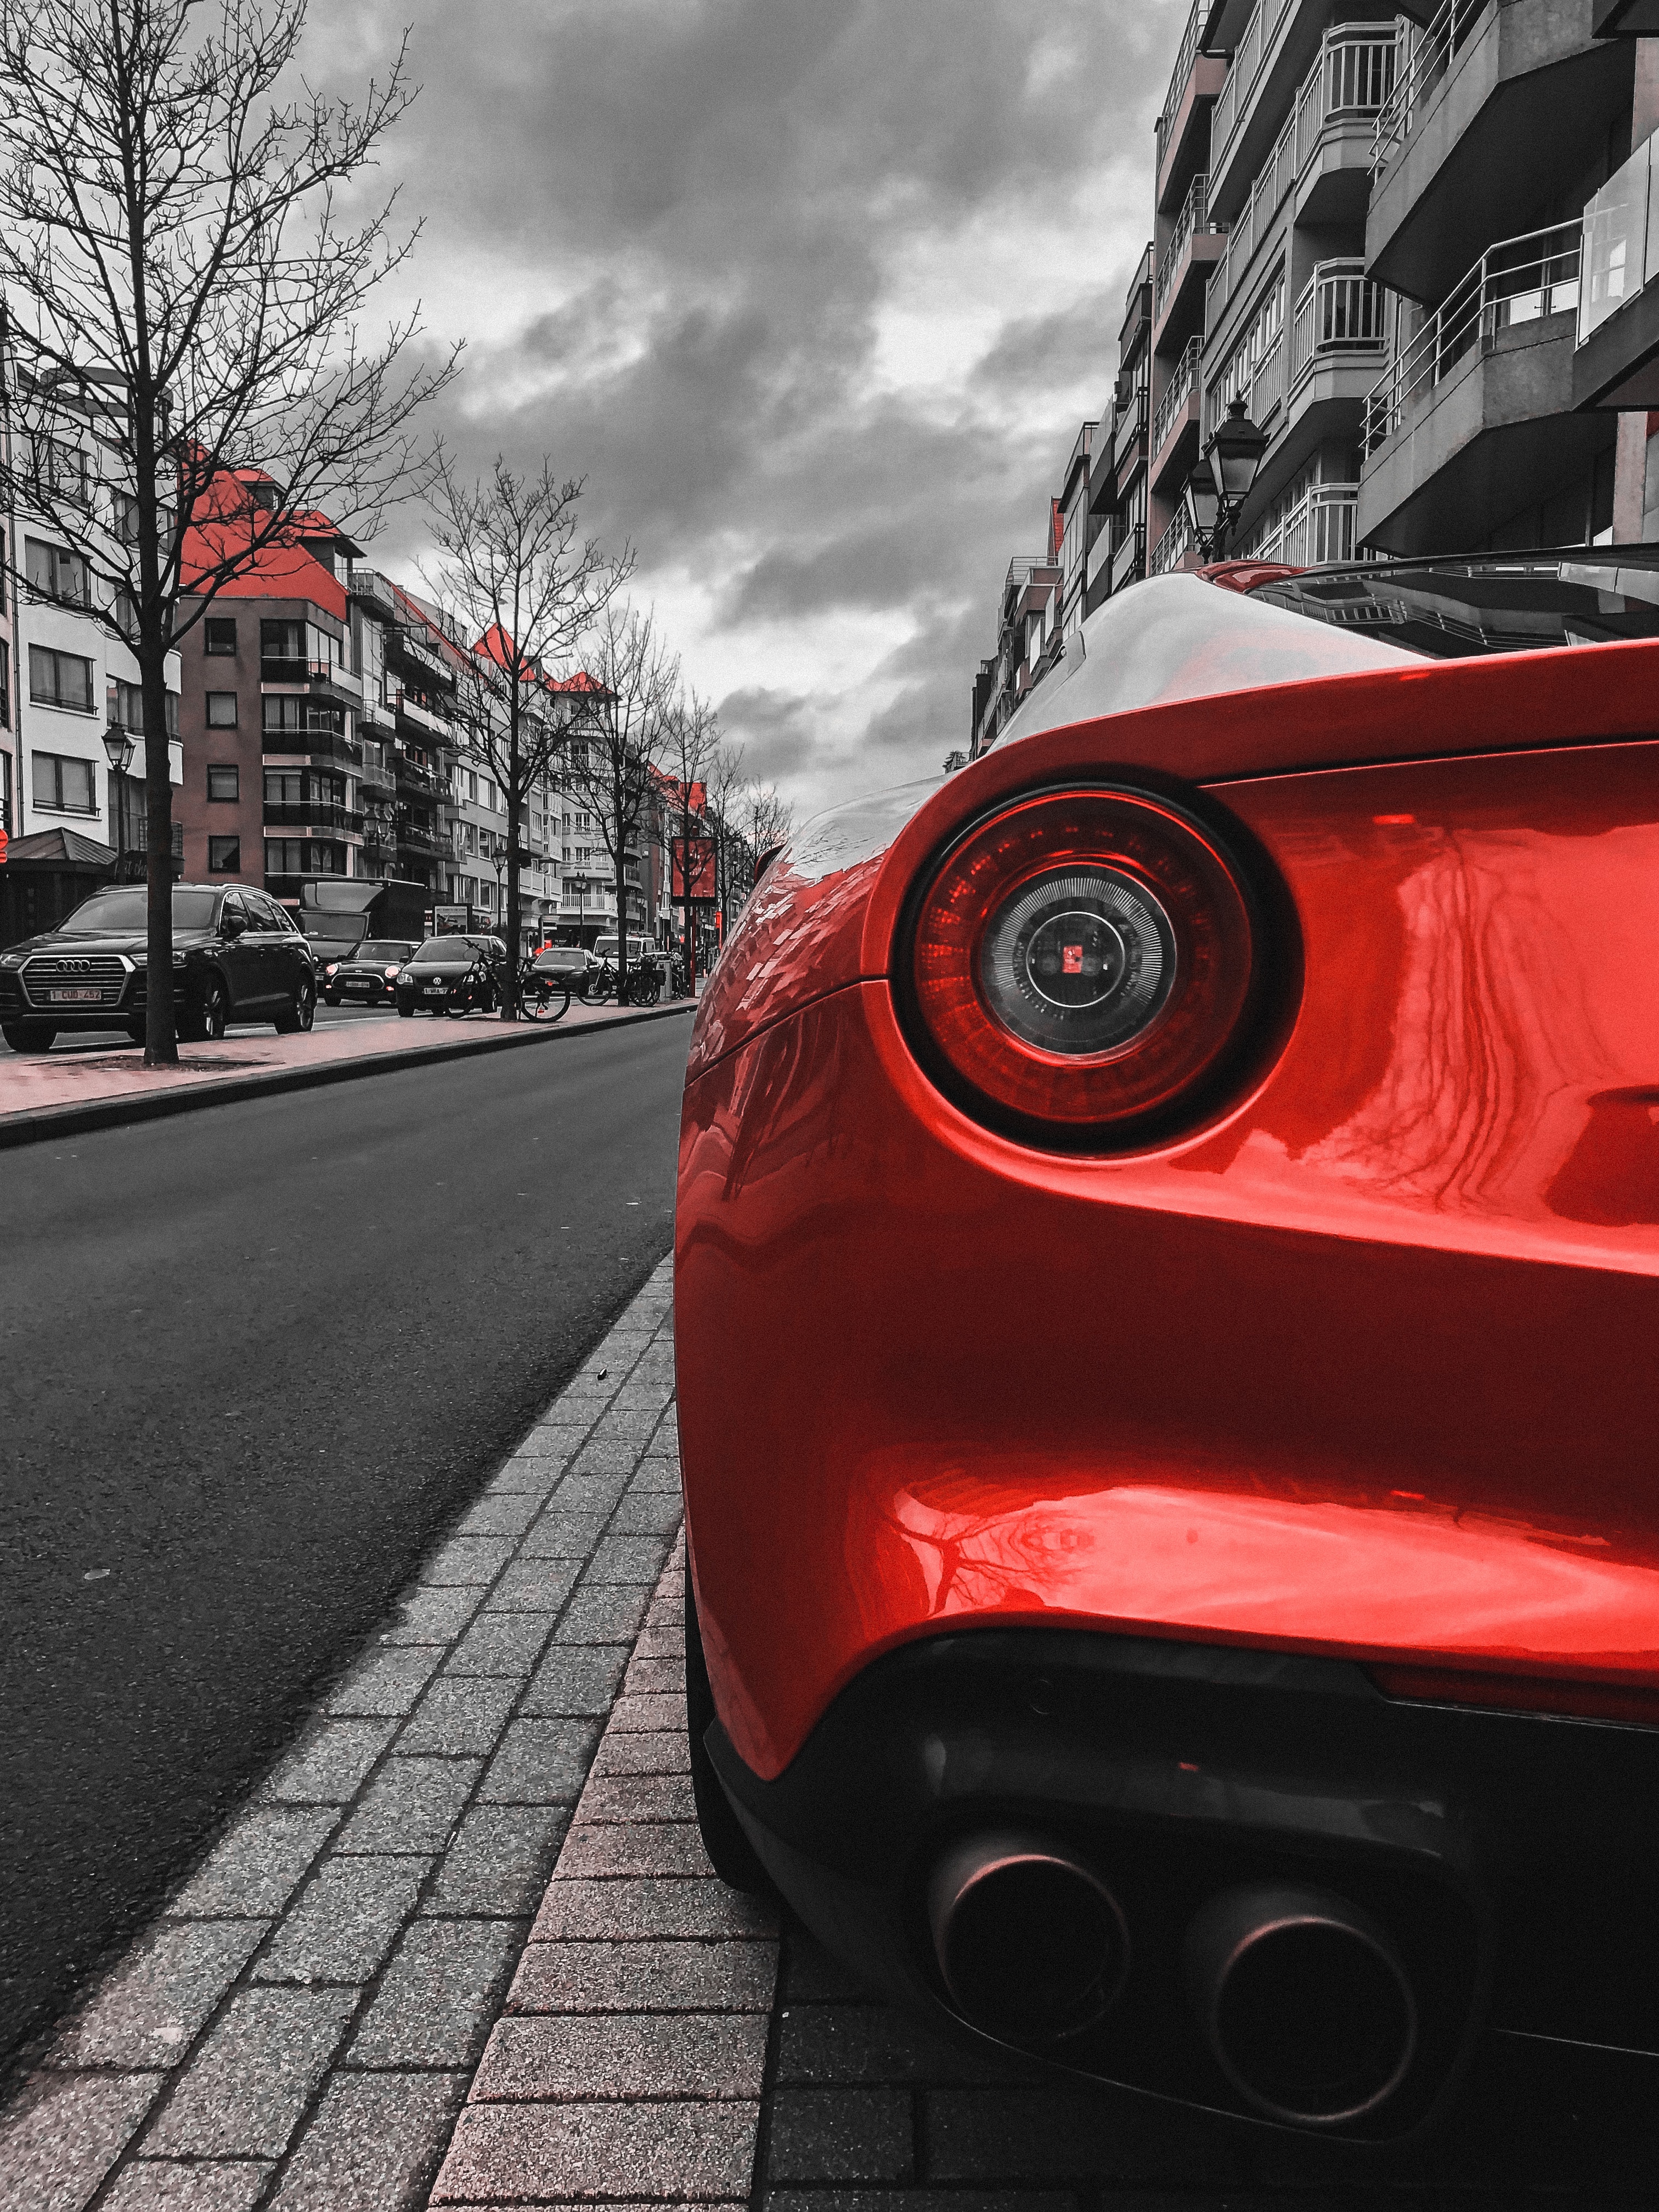 back view, street, sports car, cars, rear view, sports, red, car, machine cellphone